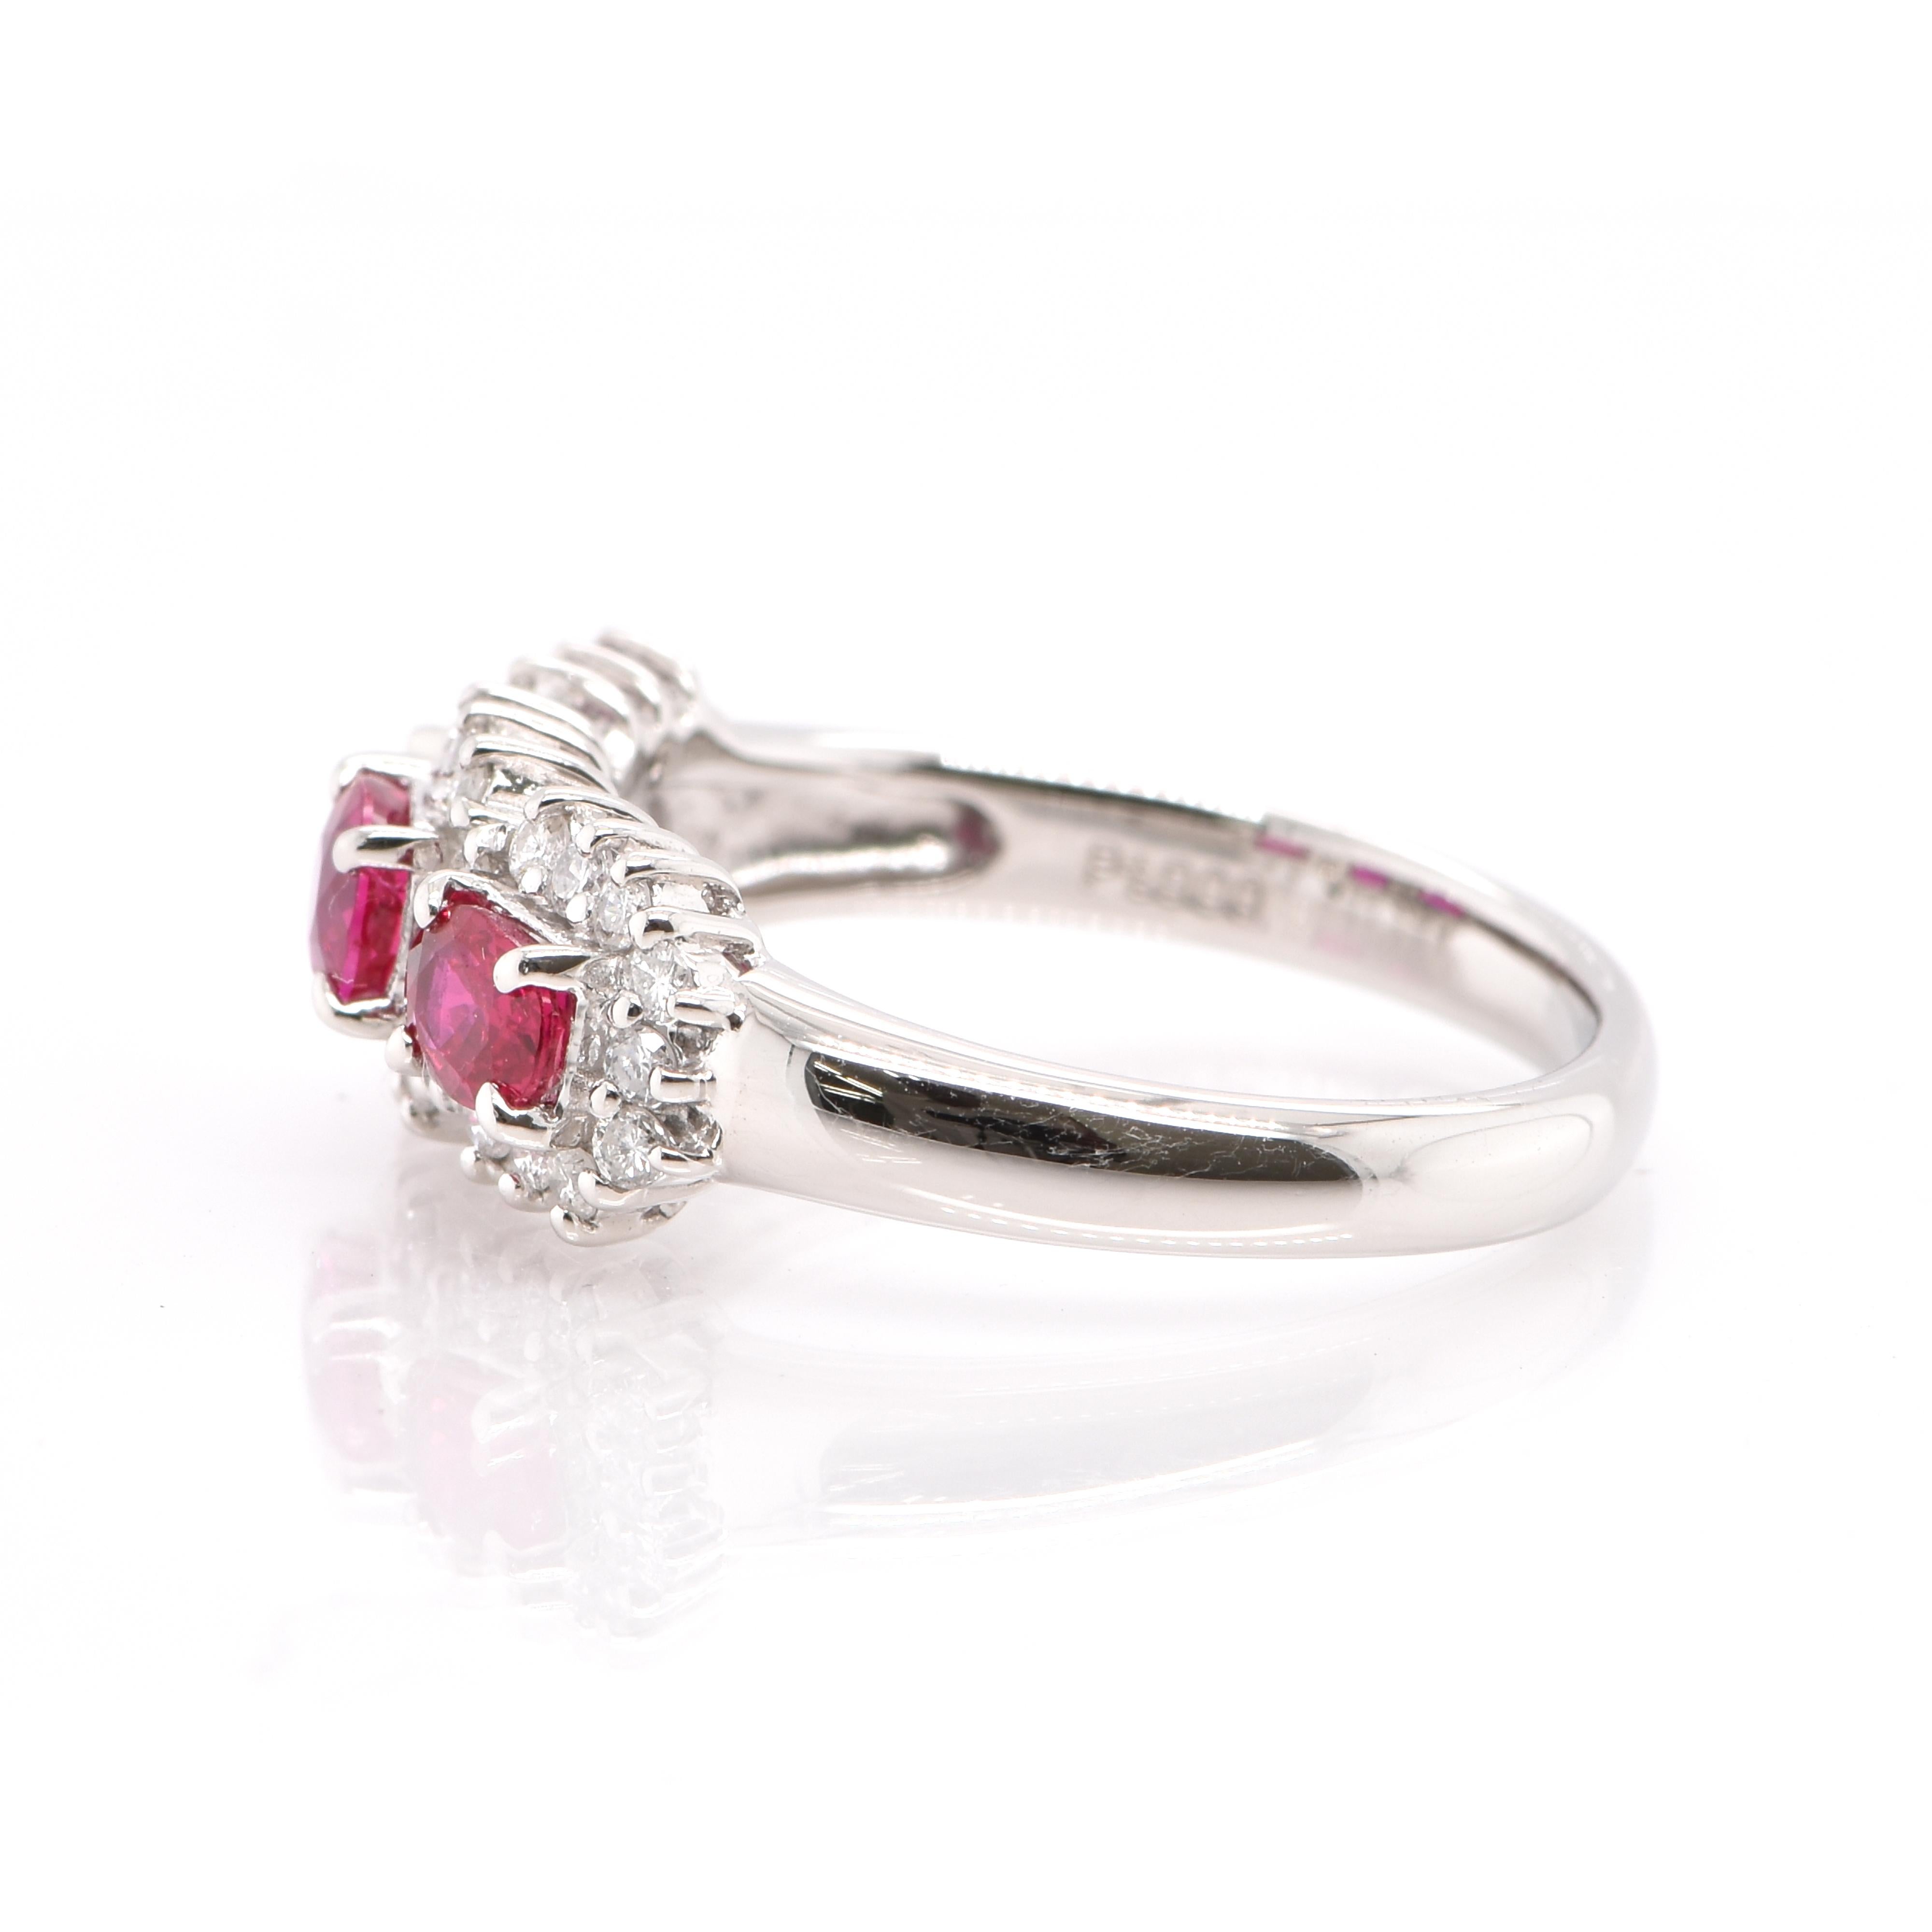 Oval Cut 0.87 Carat Natural Ruby and Diamond Band Ring Set in Platinum